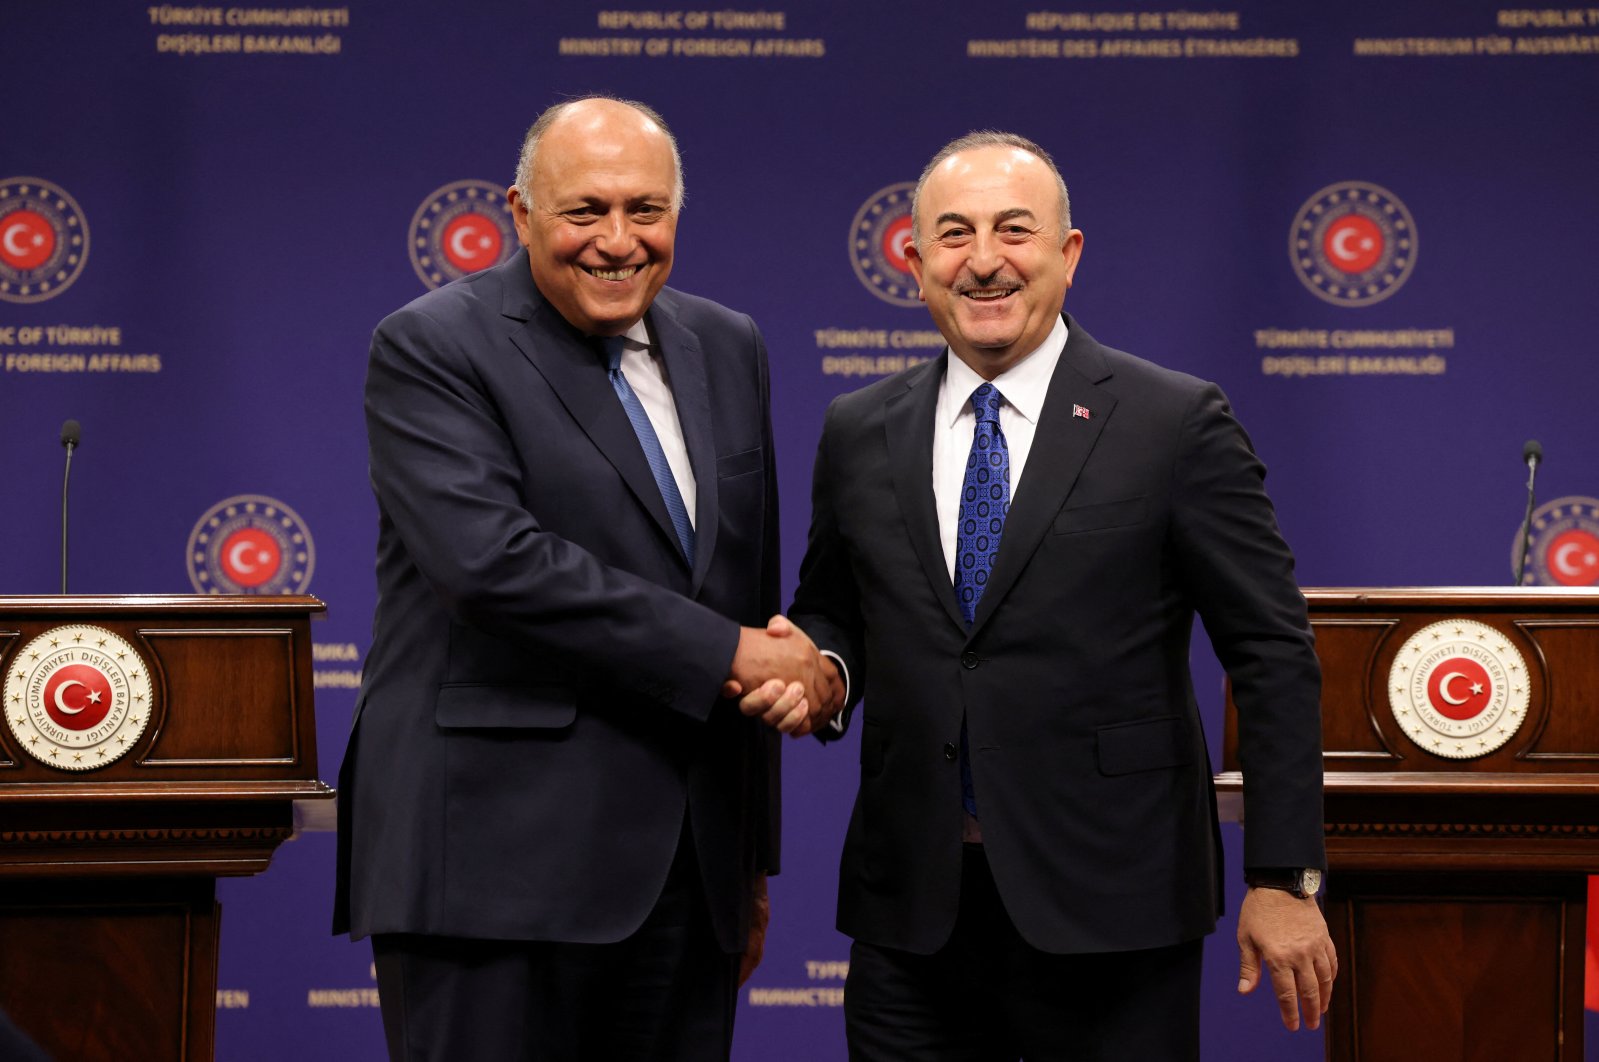 Foreign Minister Mevlüt Çavuşoğlu, Egyptian counterpart Sameh Shoukry shake hands following a joint news conference in Ankara, April 13, 2023. (AA Photo)